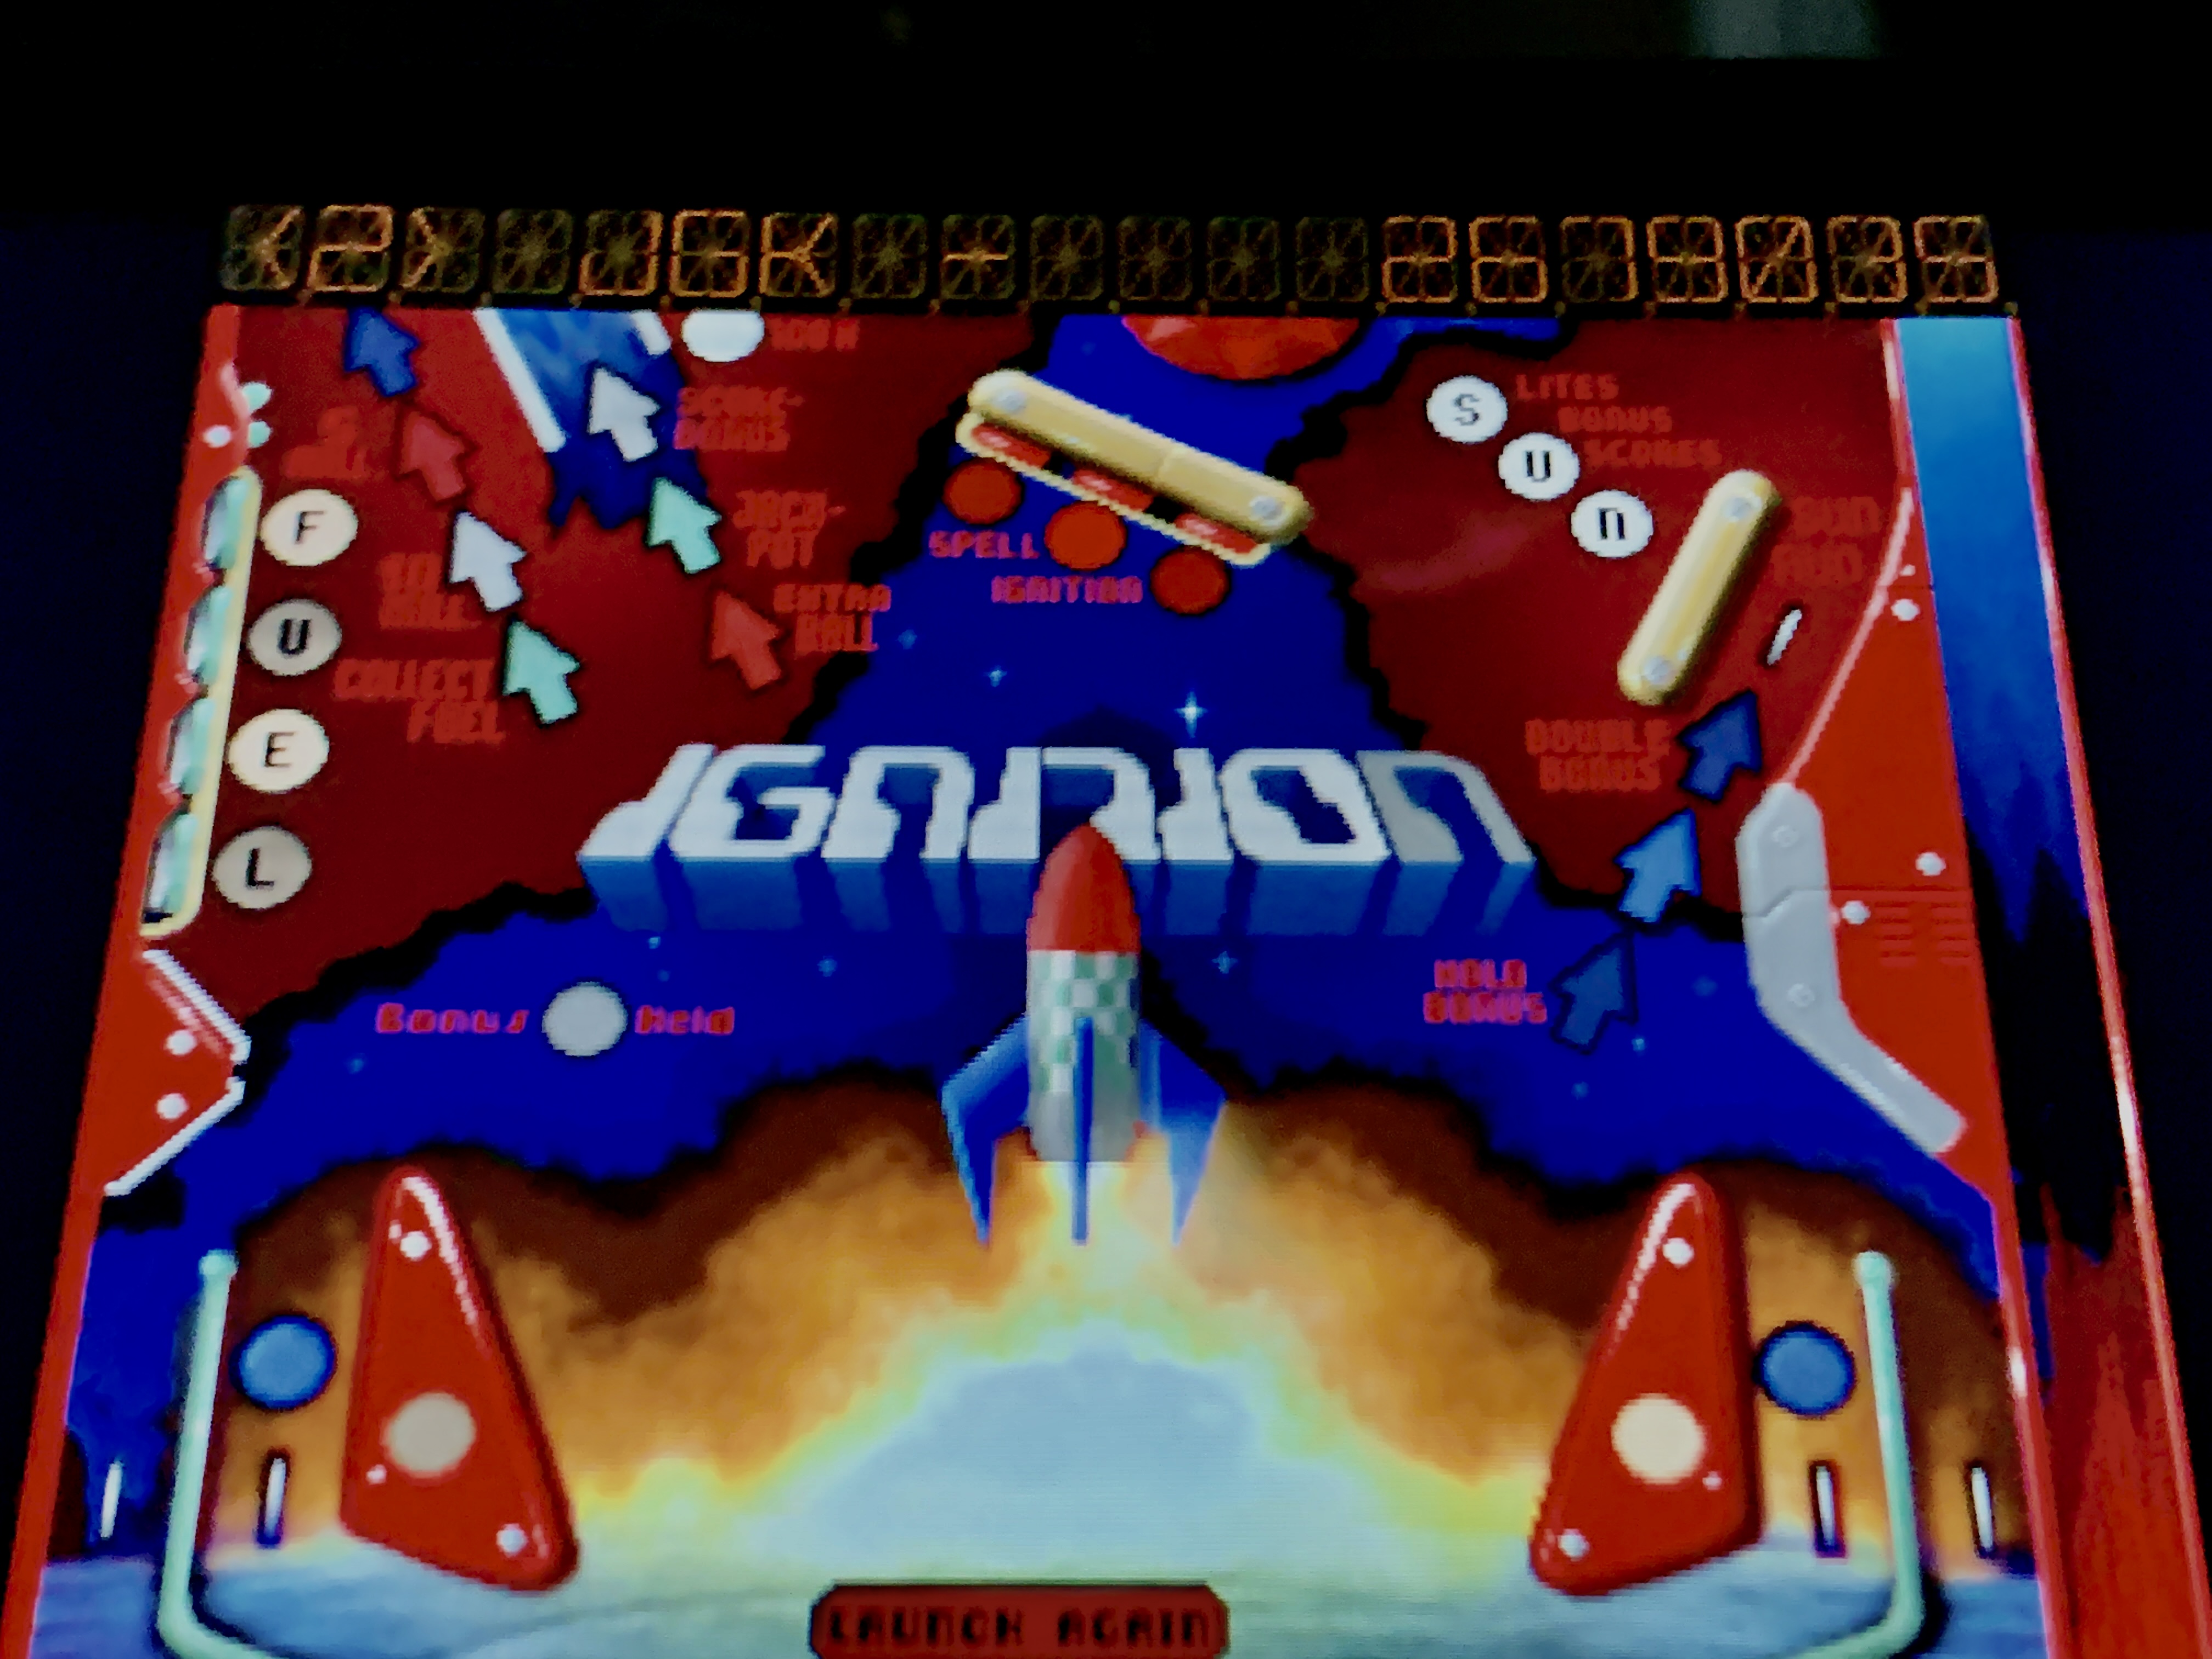 jgkspsx: Pinball Dreams: Ignition (PSP Emulated) 2,679,035 points on 2022-05-27 20:43:31